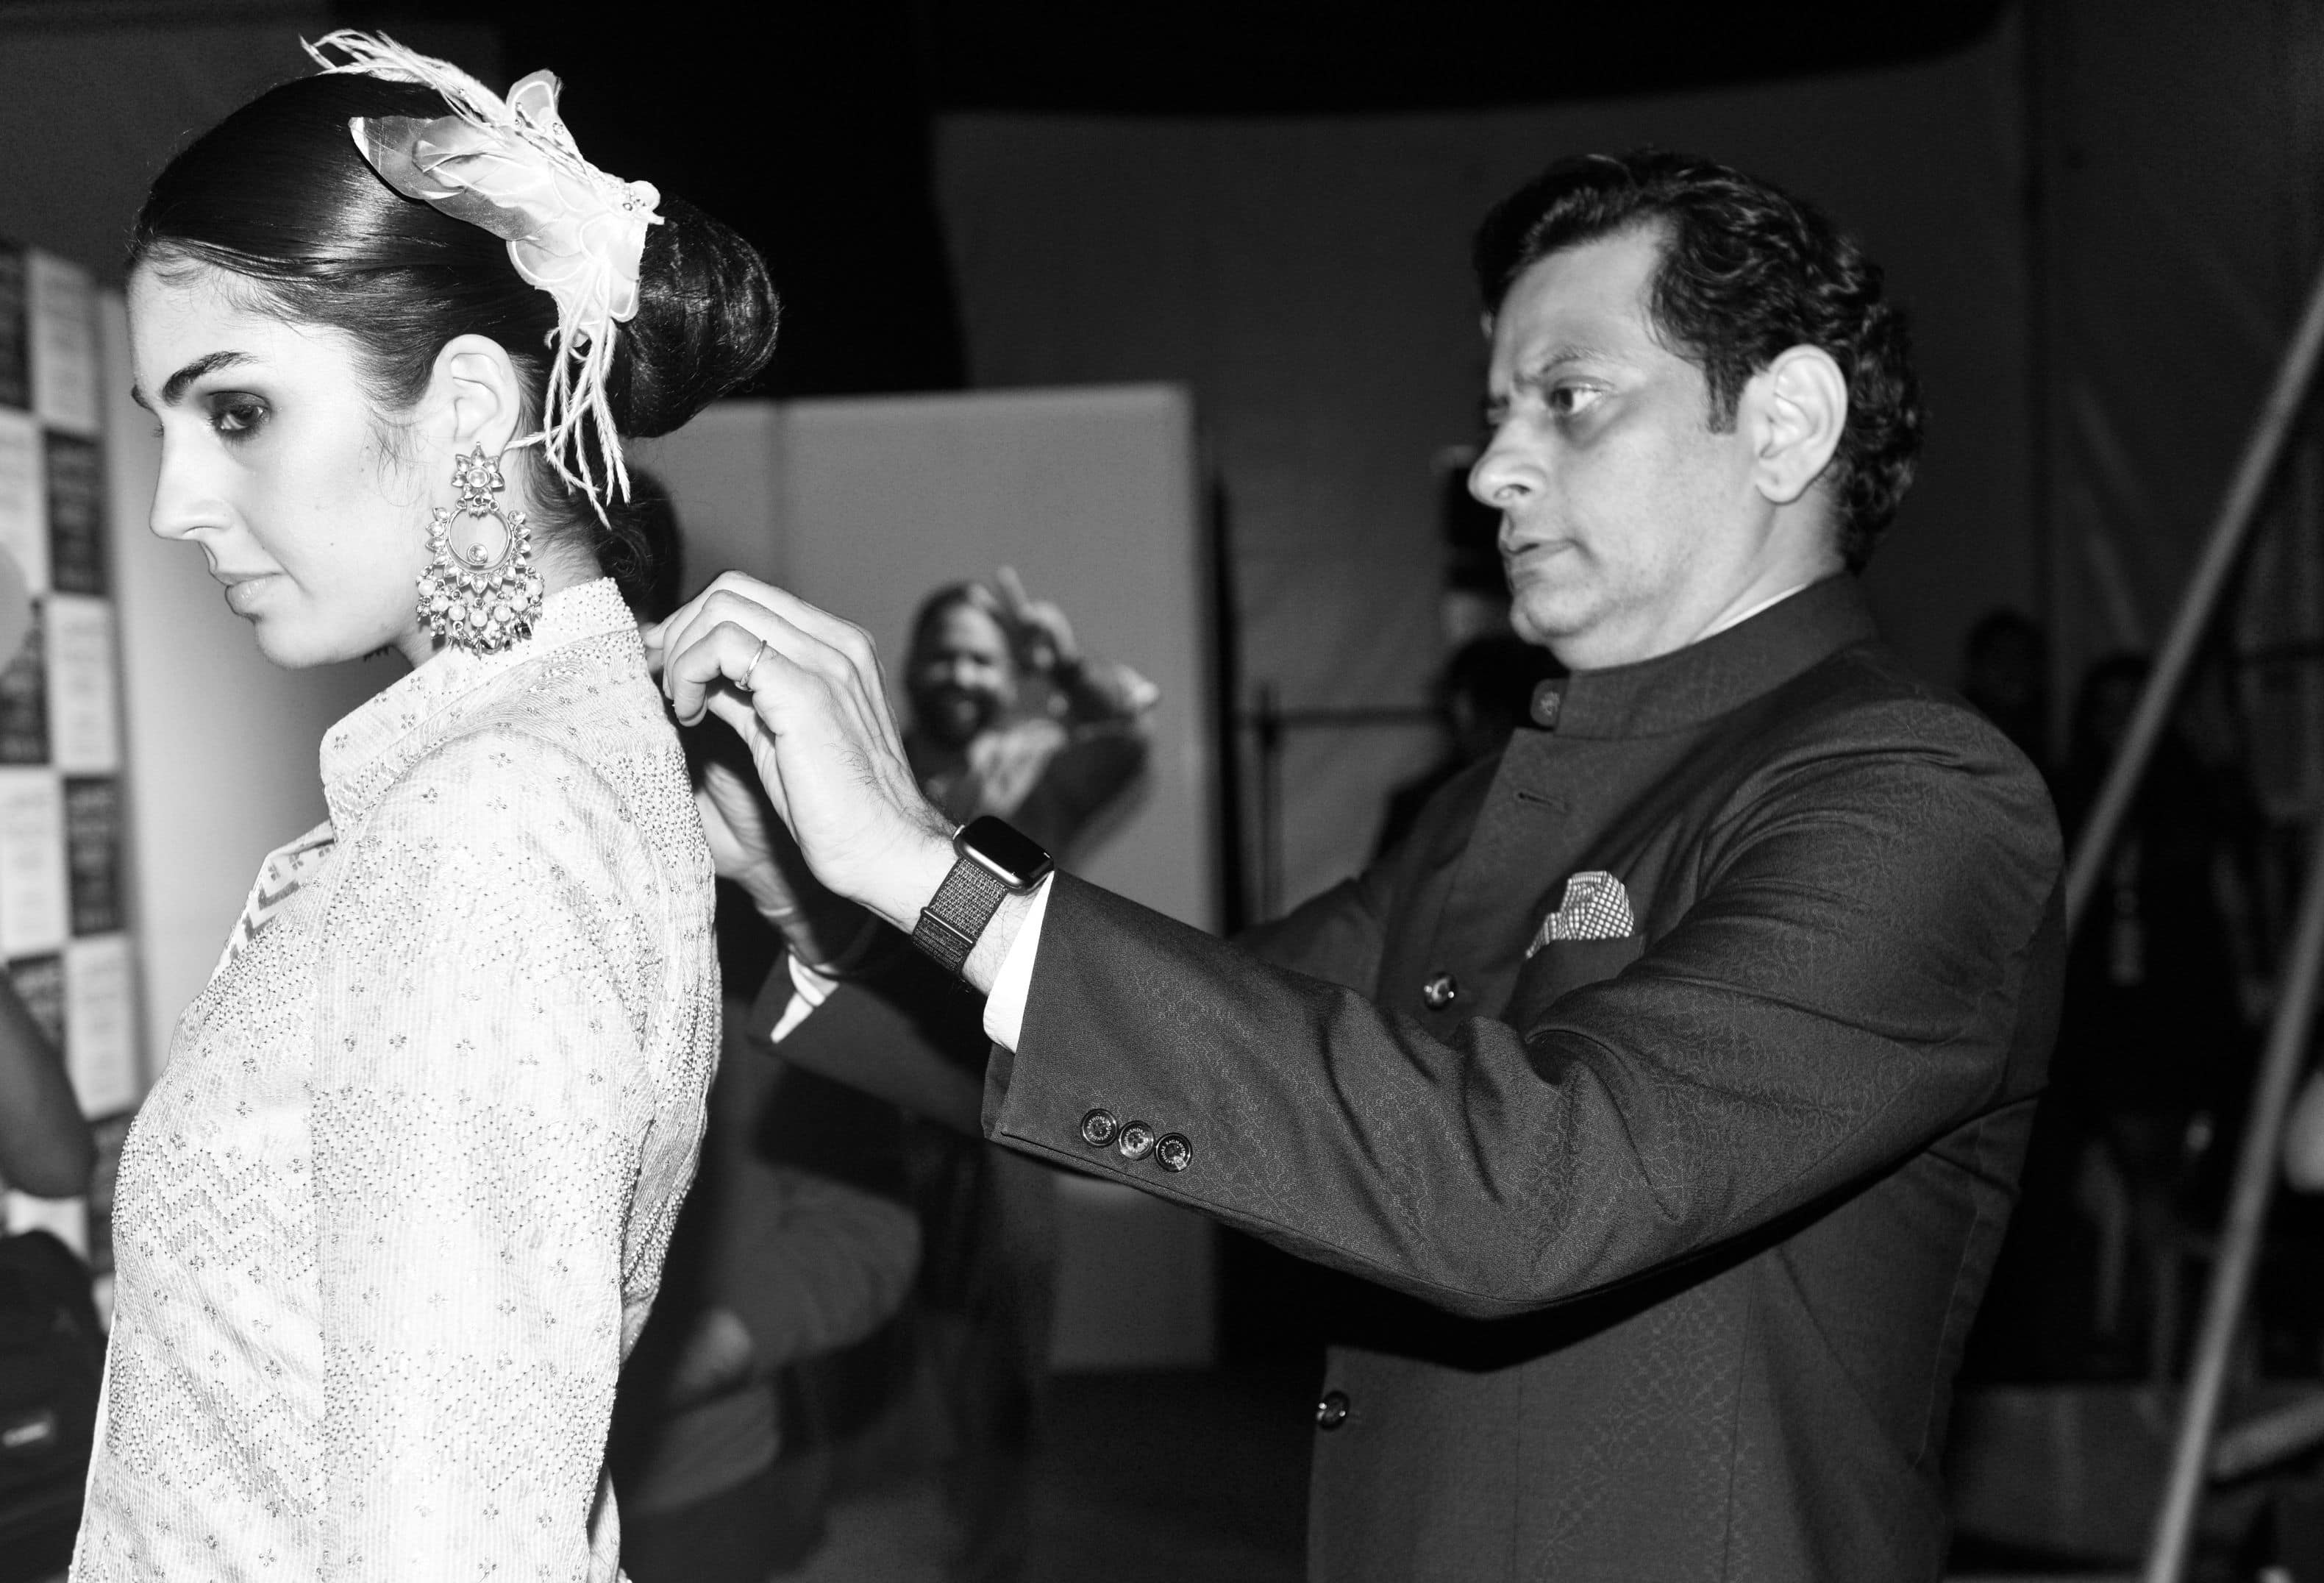 Raghavendra Rathore on bandhgalas and completing 25 years in fashion